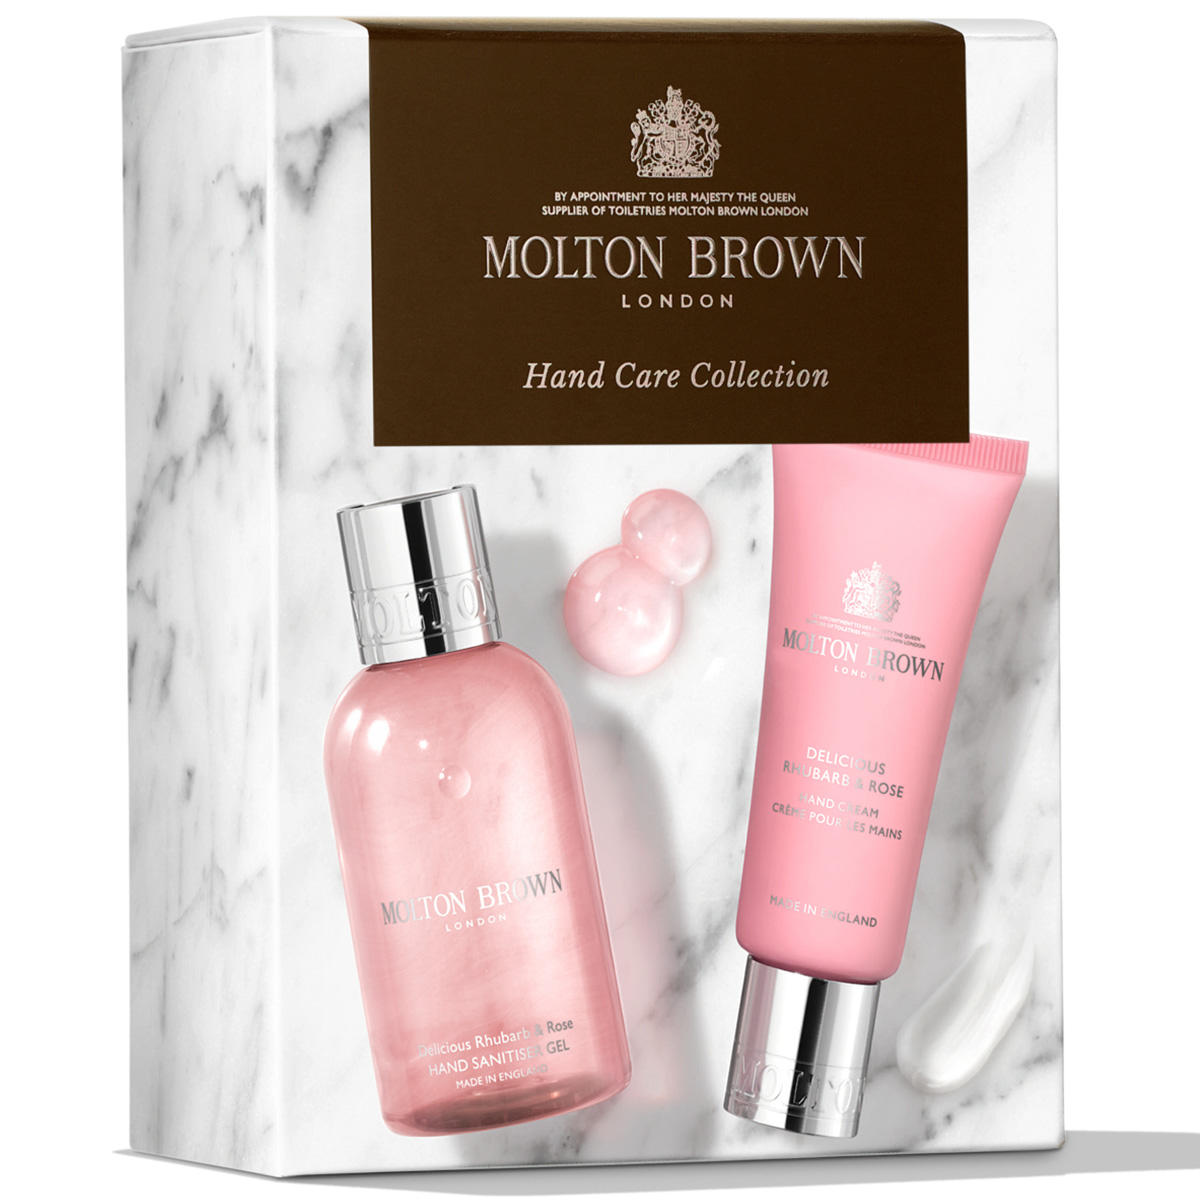 MOLTON BROWN Delicious Rhubarb & Rose Hand Care Travel Set  - 2